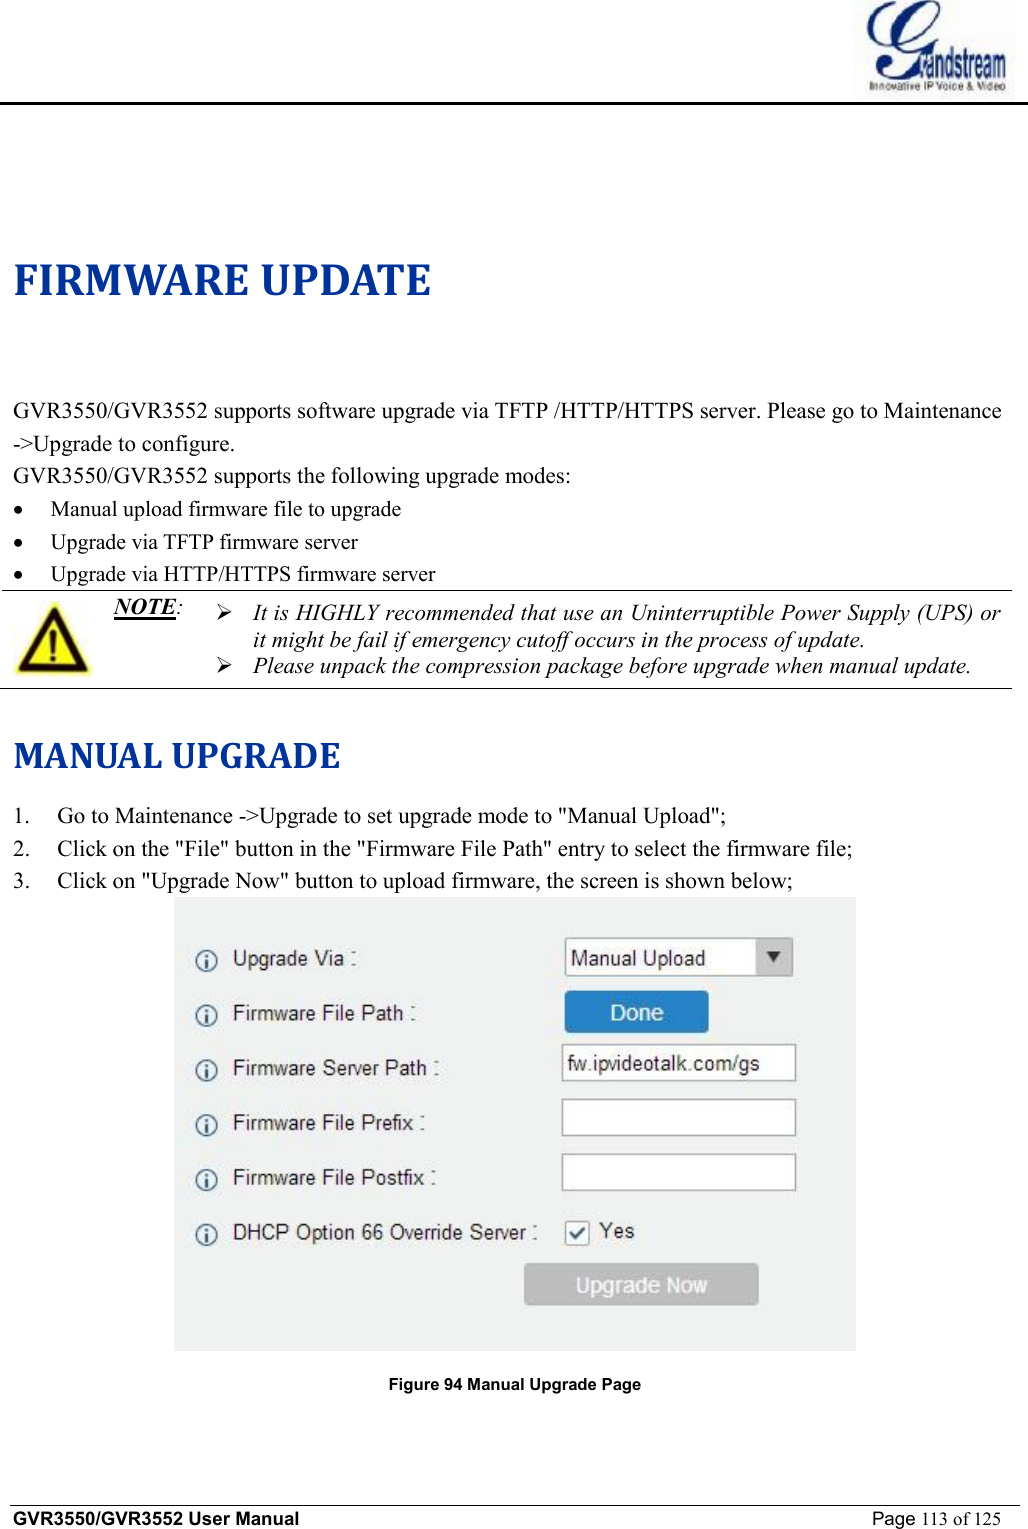    GVR3550/GVR3552 User Manual                                                             Page 113 of 125         FIRMWARE UPDATE GVR3550/GVR3552 supports software upgrade via TFTP /HTTP/HTTPS server. Please go to Maintenance -&gt;Upgrade to configure. GVR3550/GVR3552 supports the following upgrade modes: · Manual upload firmware file to upgrade · Upgrade via TFTP firmware server · Upgrade via HTTP/HTTPS firmware server  NOTE:  Ø It is HIGHLY recommended that use an Uninterruptible Power Supply (UPS) or it might be fail if emergency cutoff occurs in the process of update.  Ø Please unpack the compression package before upgrade when manual update.  MANUAL UPGRADE  1. Go to Maintenance -&gt;Upgrade to set upgrade mode to &quot;Manual Upload&quot;; 2. Click on the &quot;File&quot; button in the &quot;Firmware File Path&quot; entry to select the firmware file; 3. Click on &quot;Upgrade Now&quot; button to upload firmware, the screen is shown below;  Figure 94 Manual Upgrade Page 